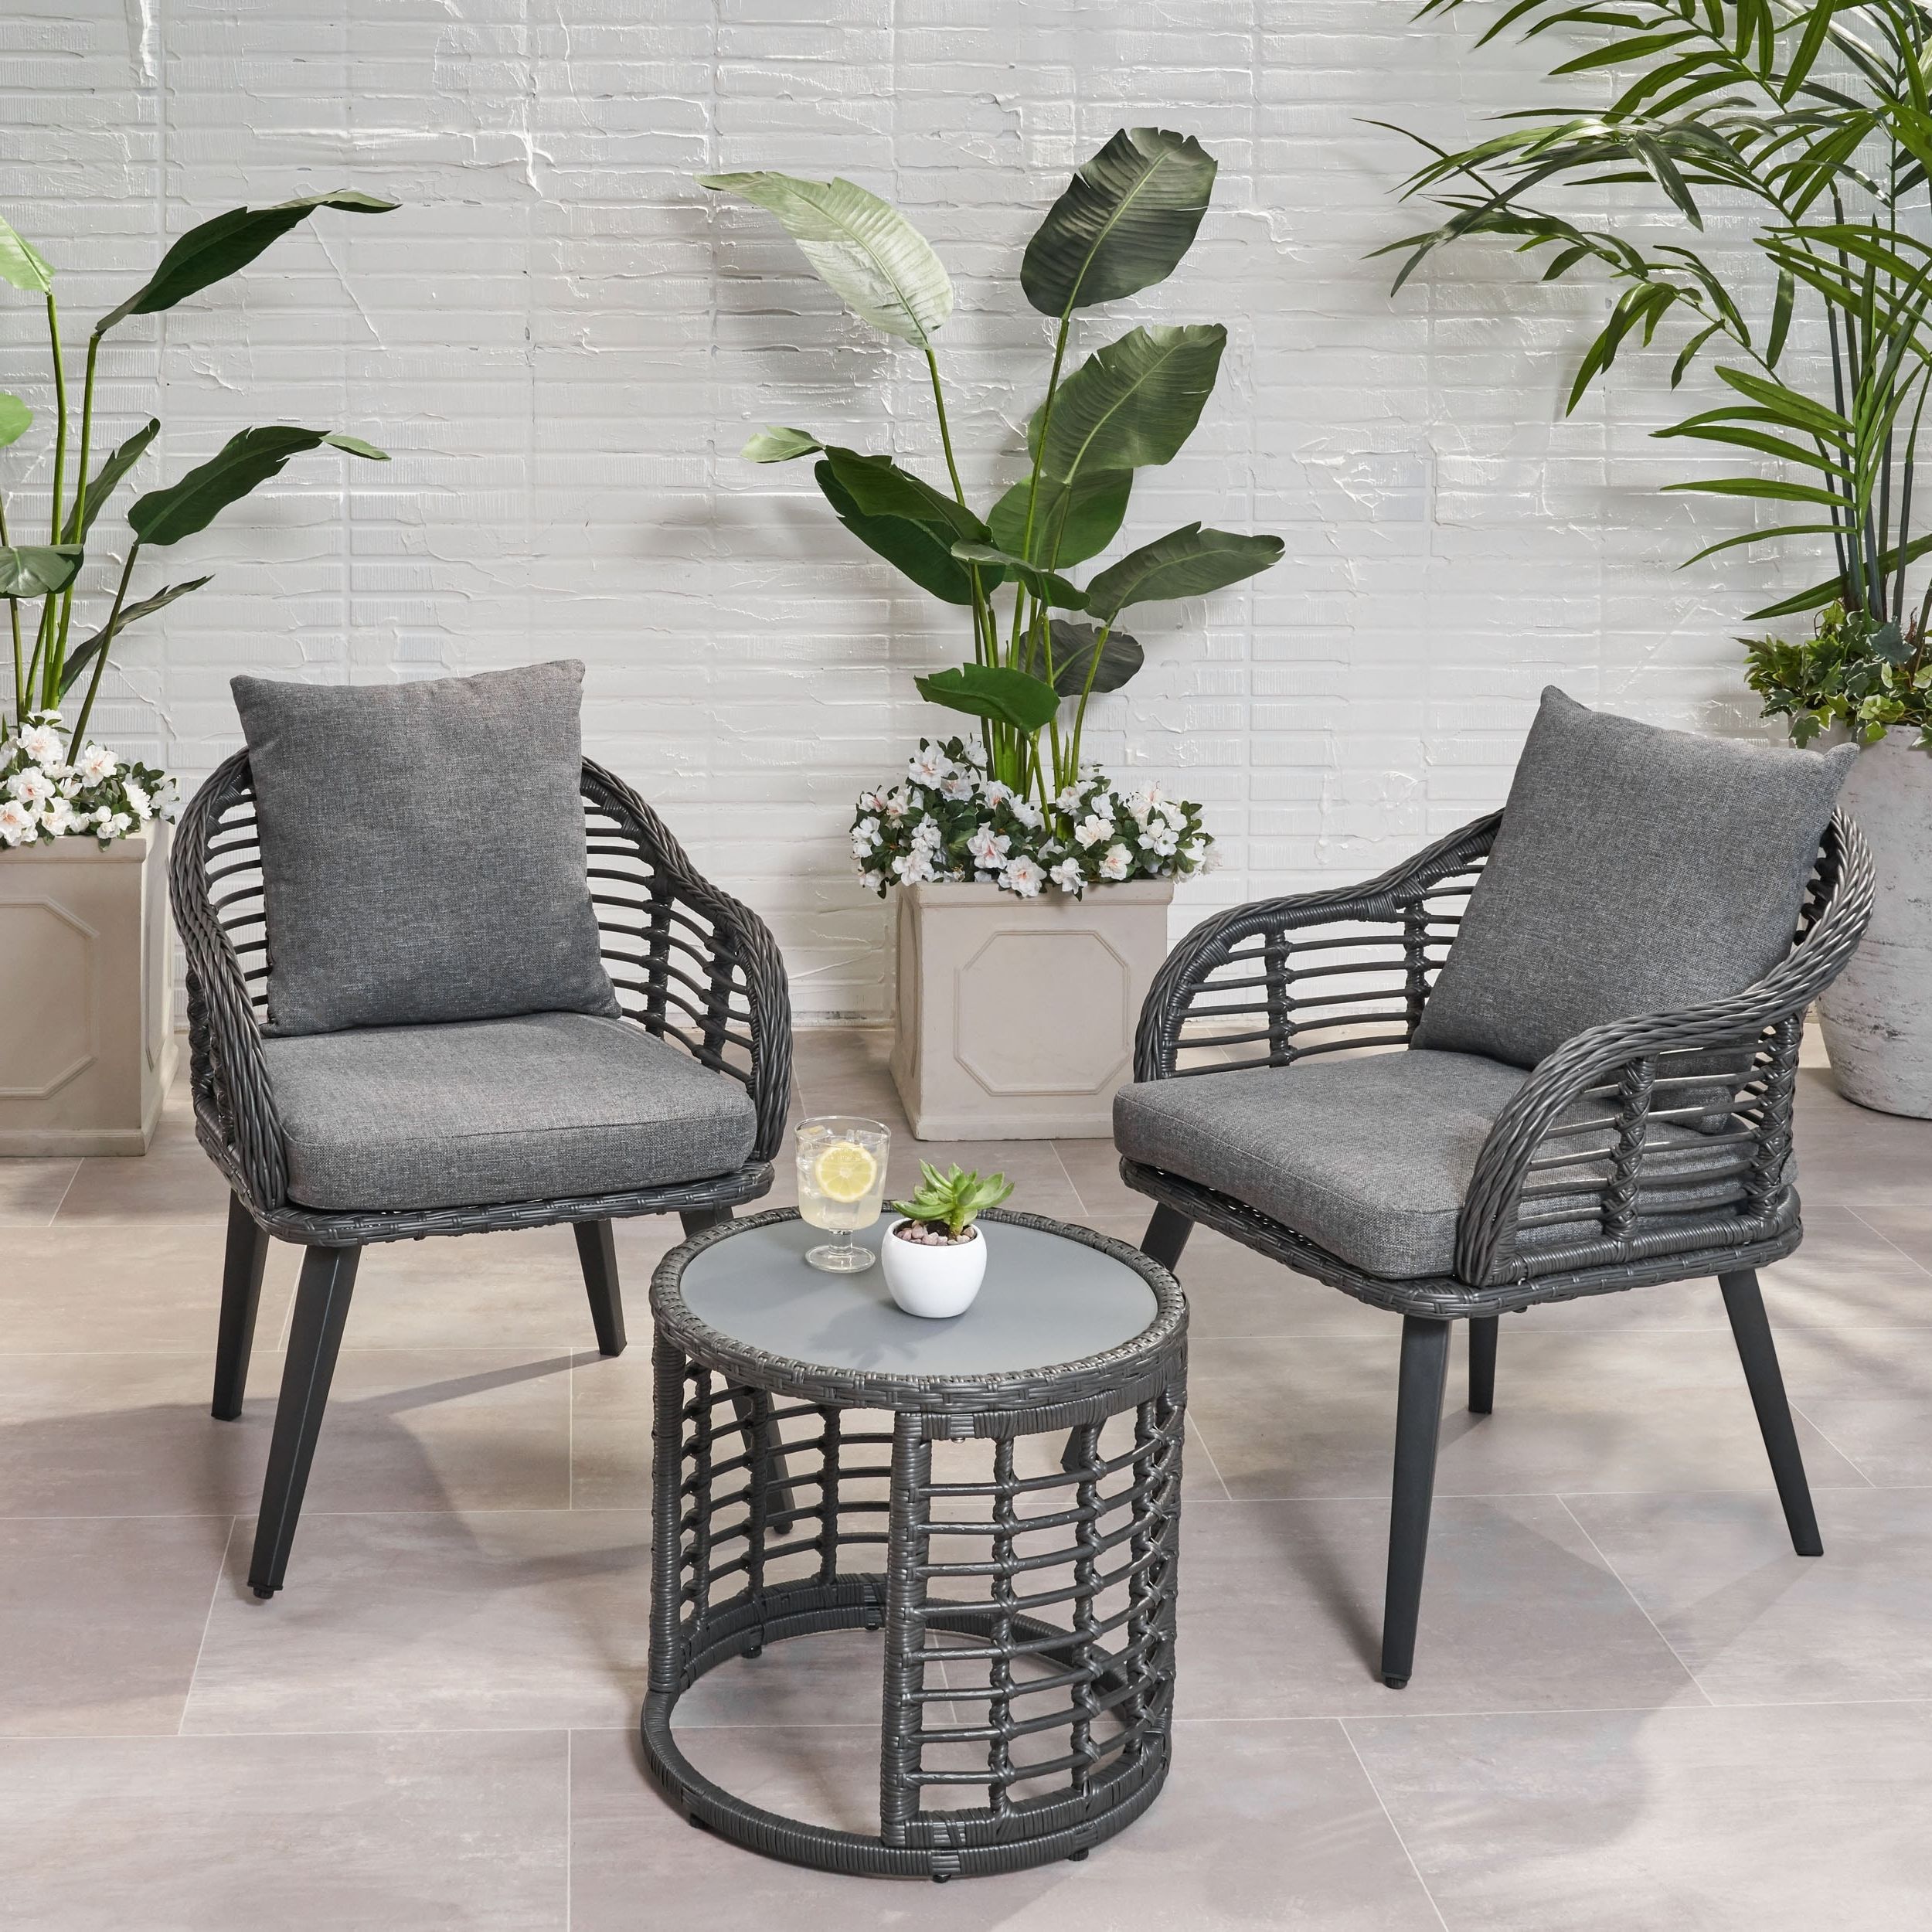 Well Known Tatiana Outdoor 3 Piece Boho Wicker Chat Setchristopher Knight Home –  Overstock – 28987059 Within 3 Piece Outdoor Boho Wicker Chat Set (View 5 of 15)